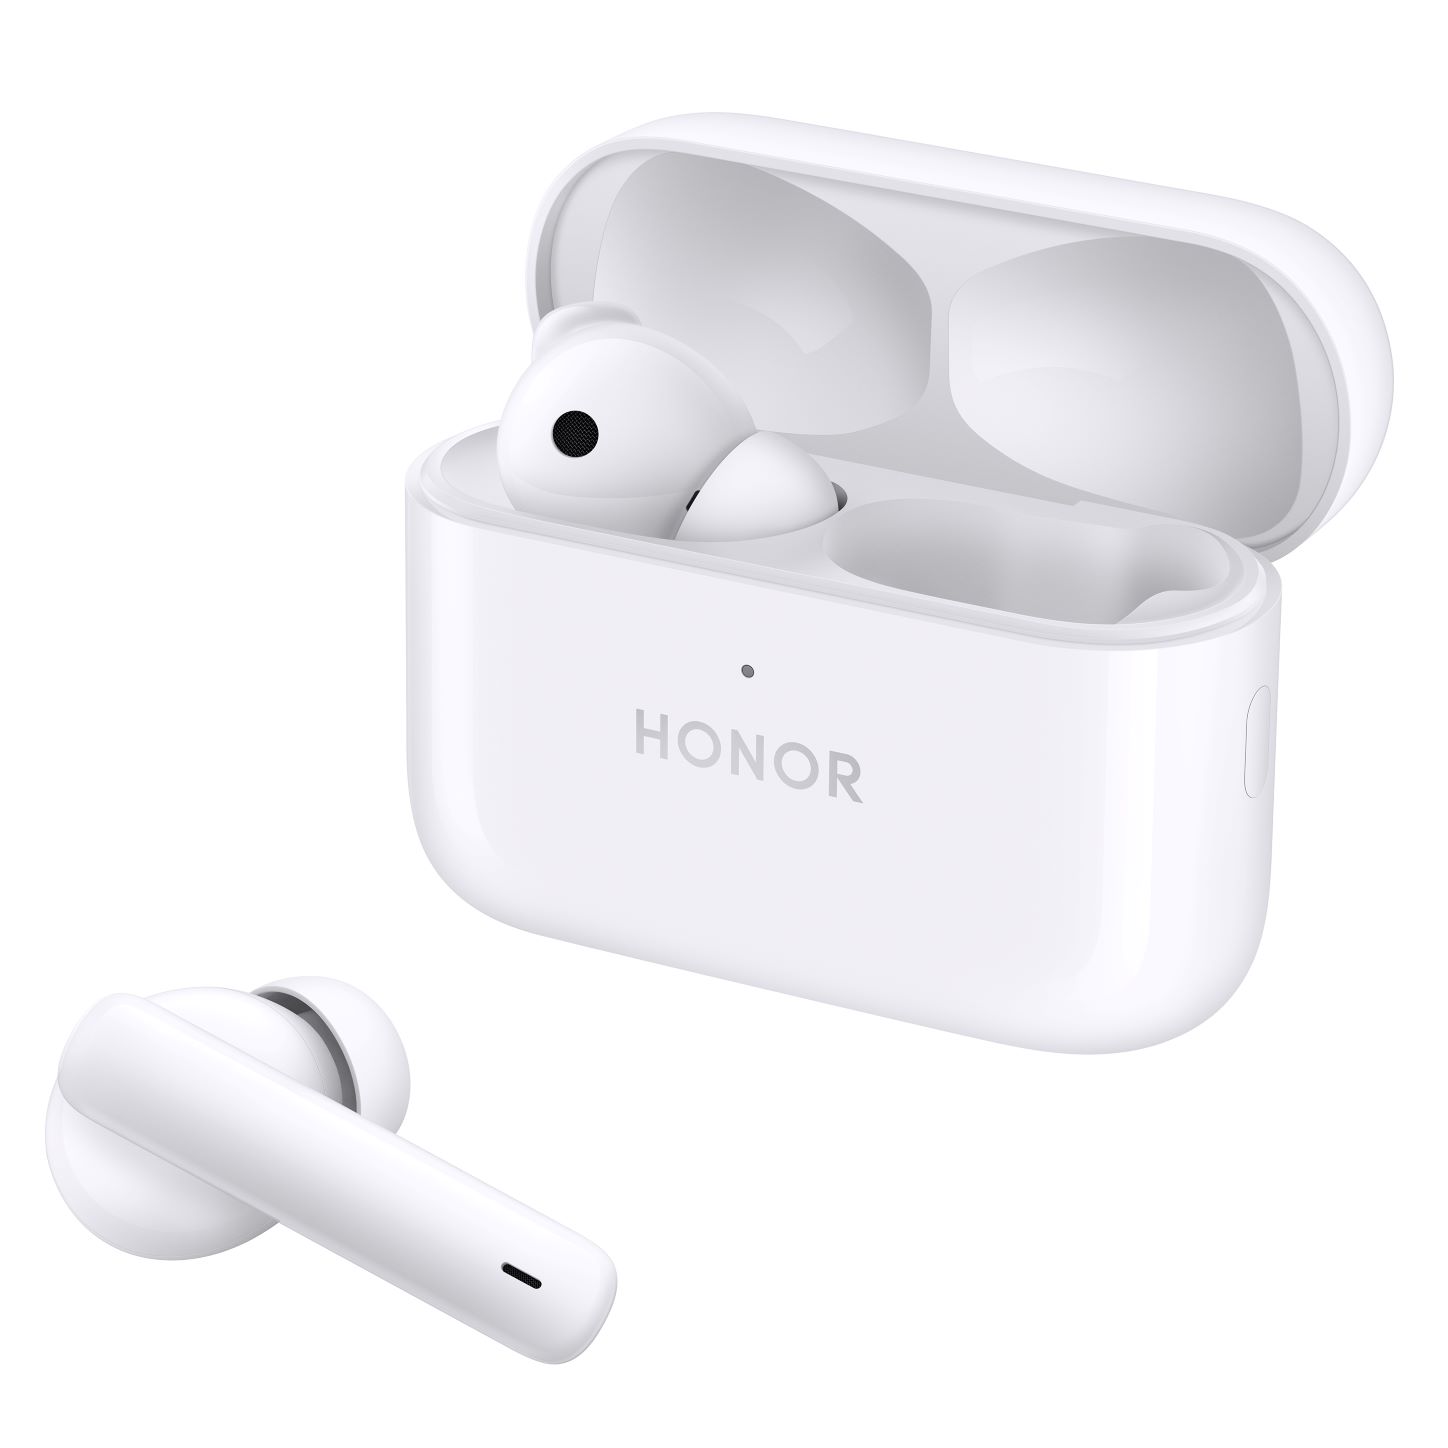 HONOR Earbuds 2 Lite 7月8日早鸟价预购！